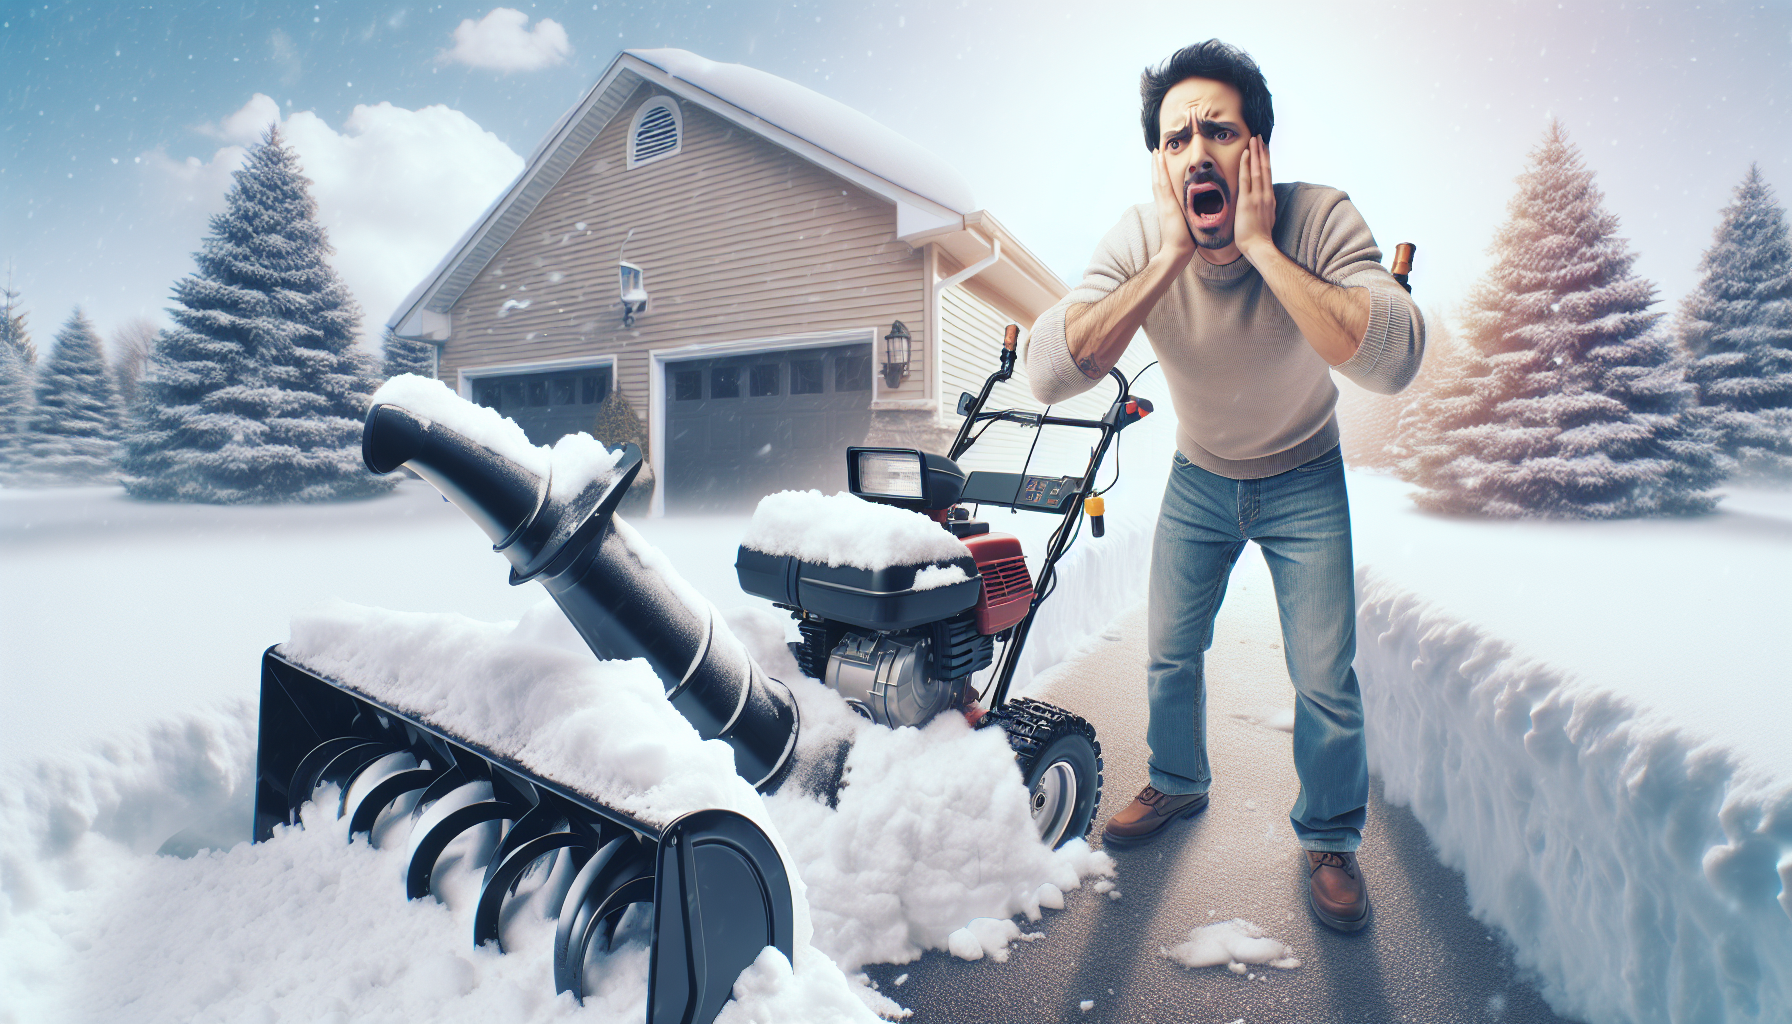 What Are The Drawbacks Of A Snow Blower?